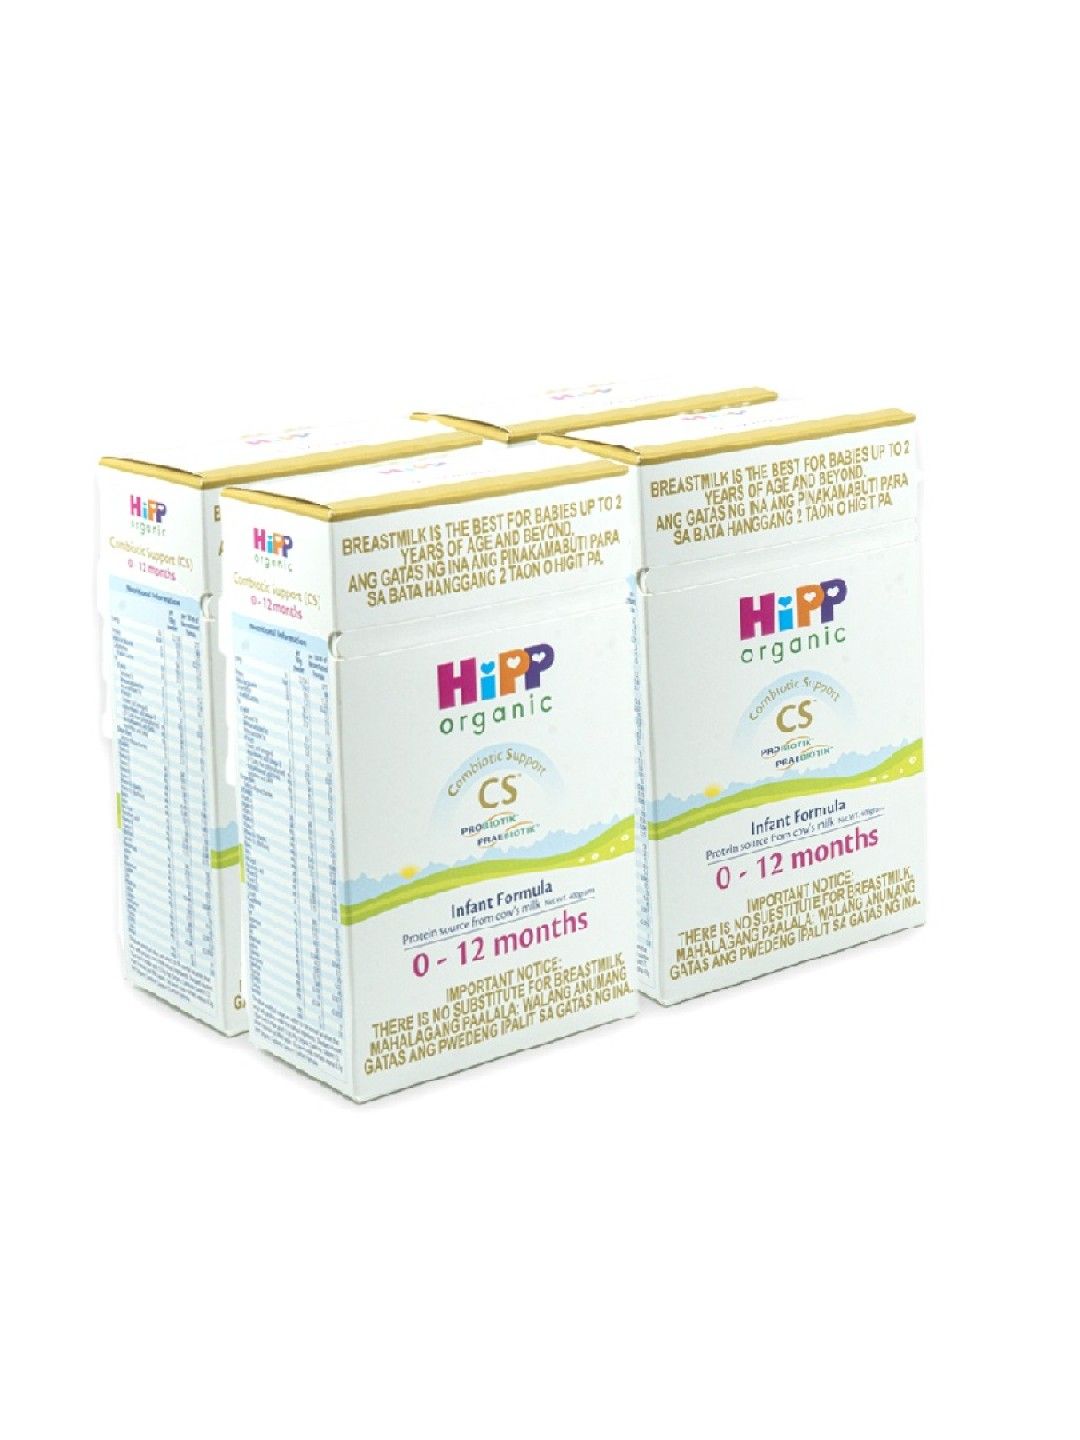 HiPP Organic Combiotic Support Bag-in-Boxes Infant Formula 0-12 Months (400g x 4)